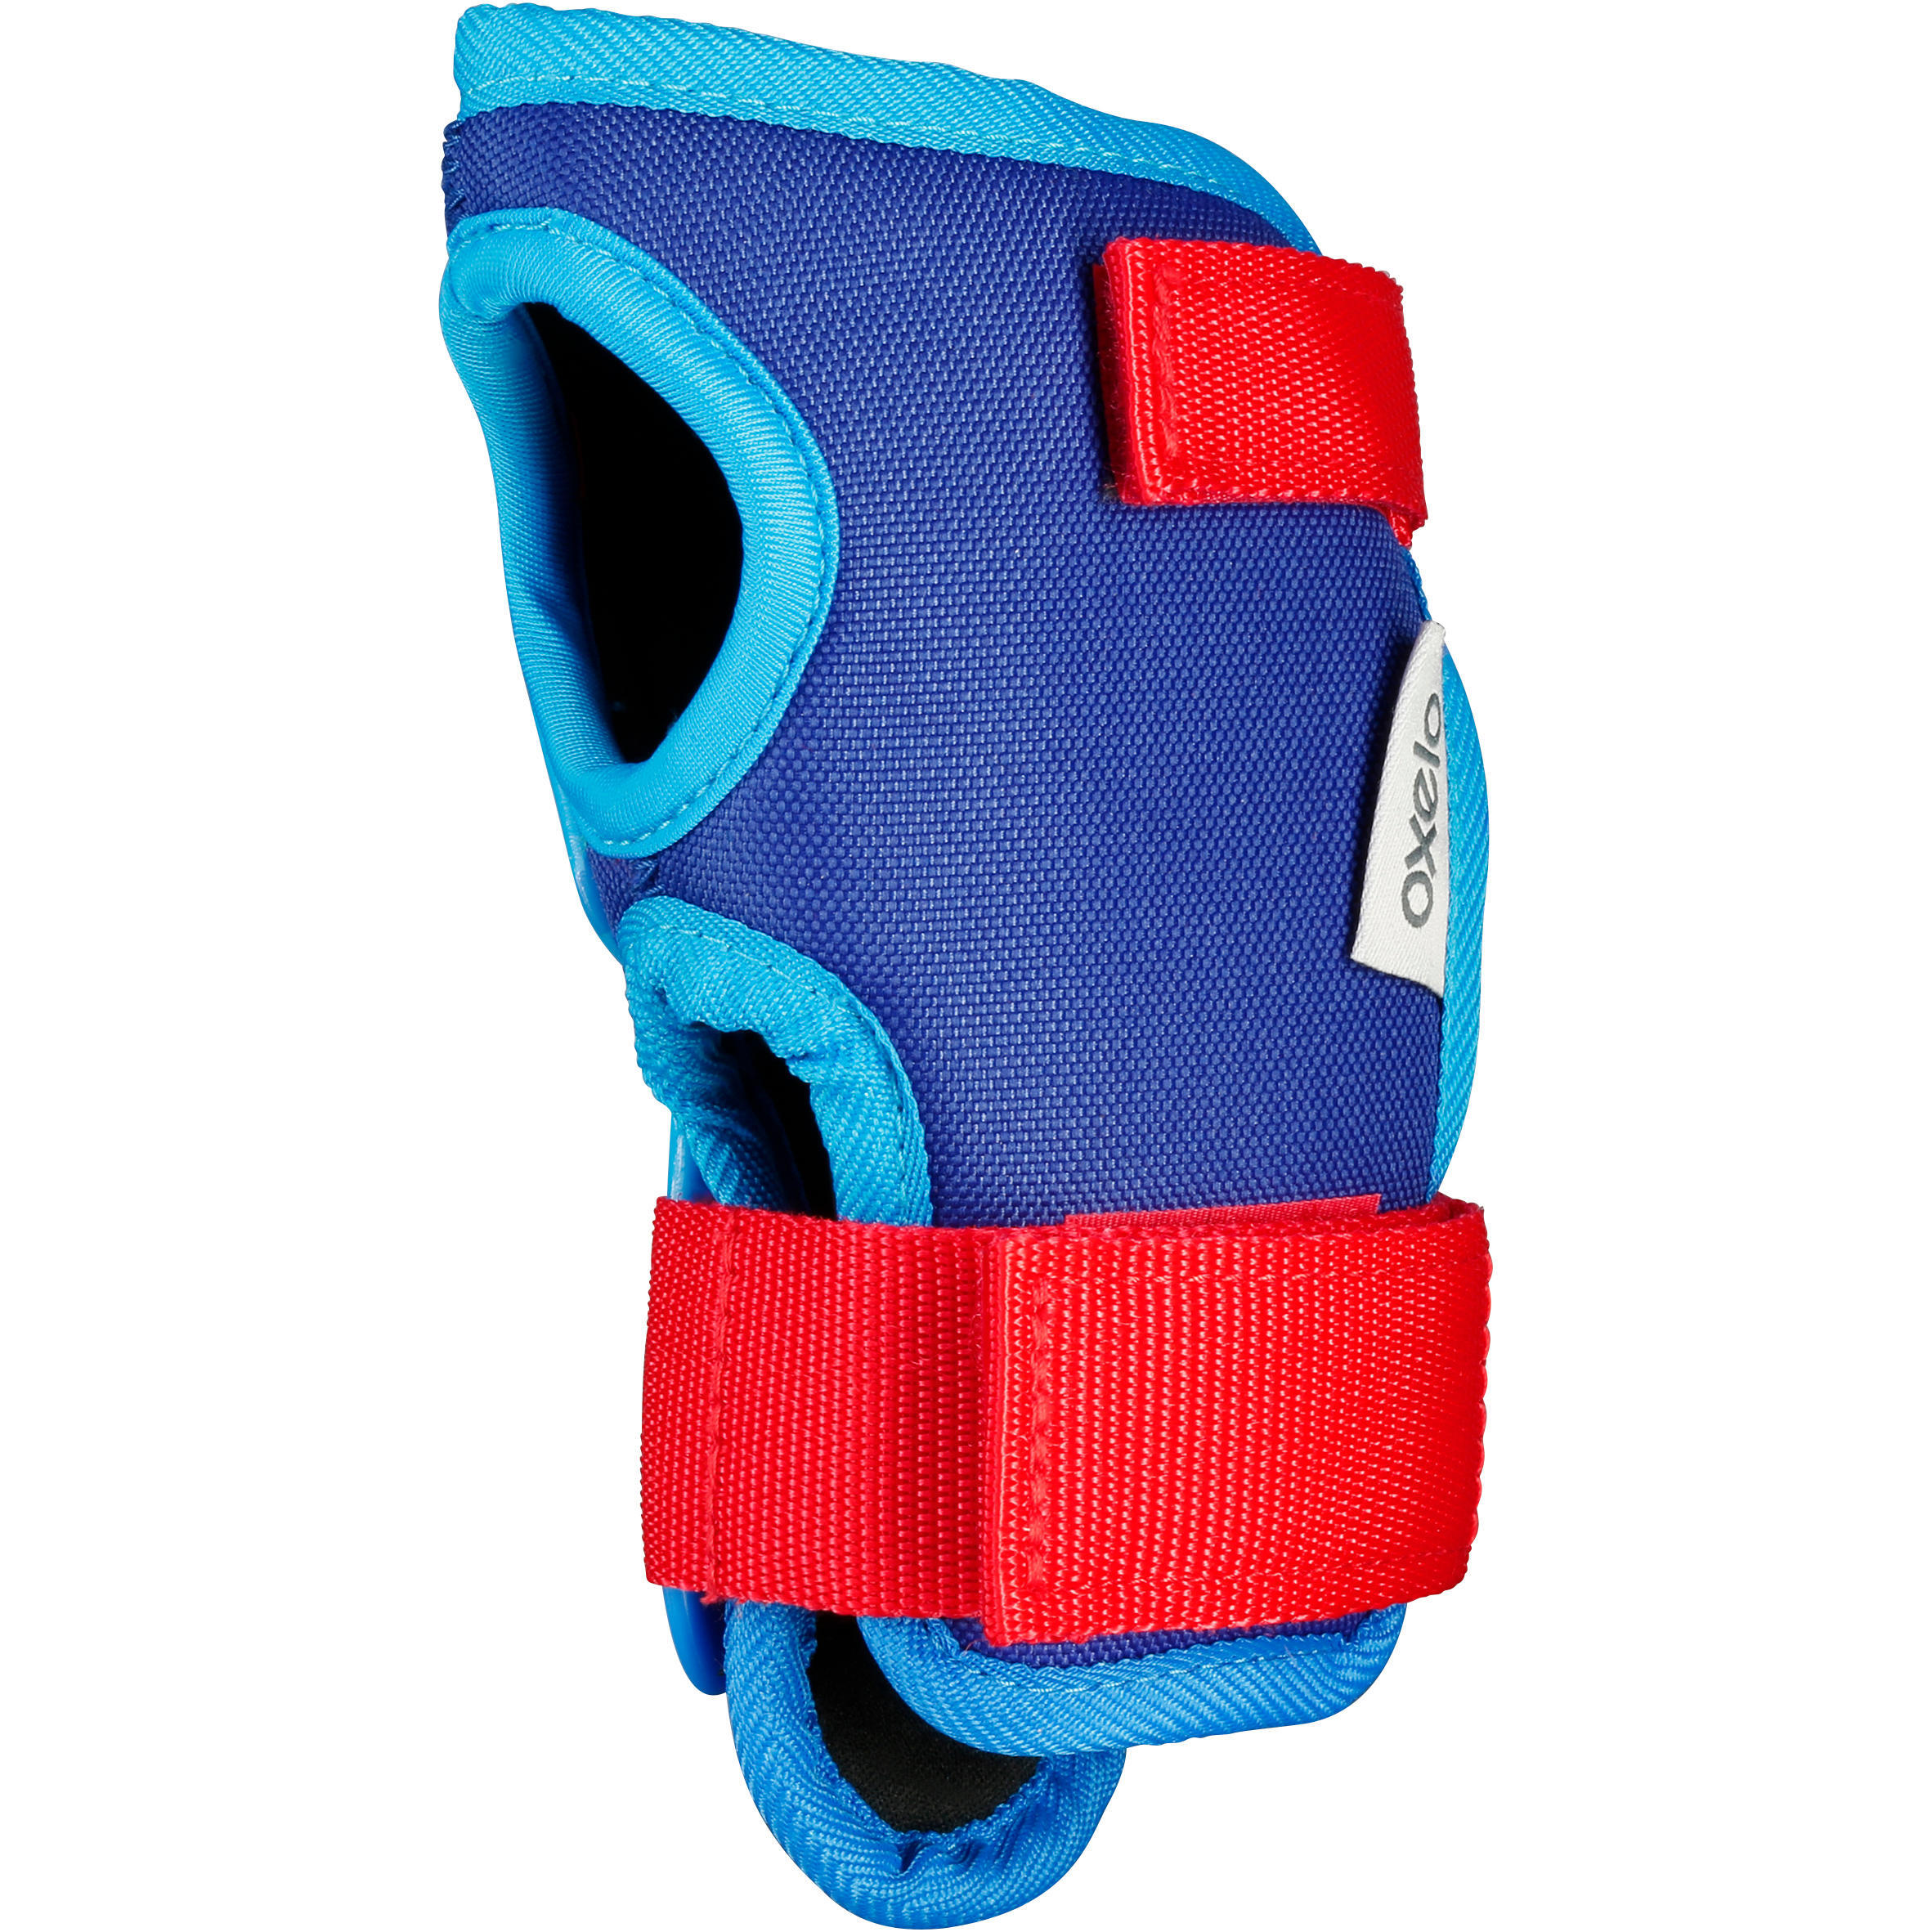 Kids' 2 x 3-Piece Inline Skating Scooter Skateboard Protective Gear Play - Blue 5/11